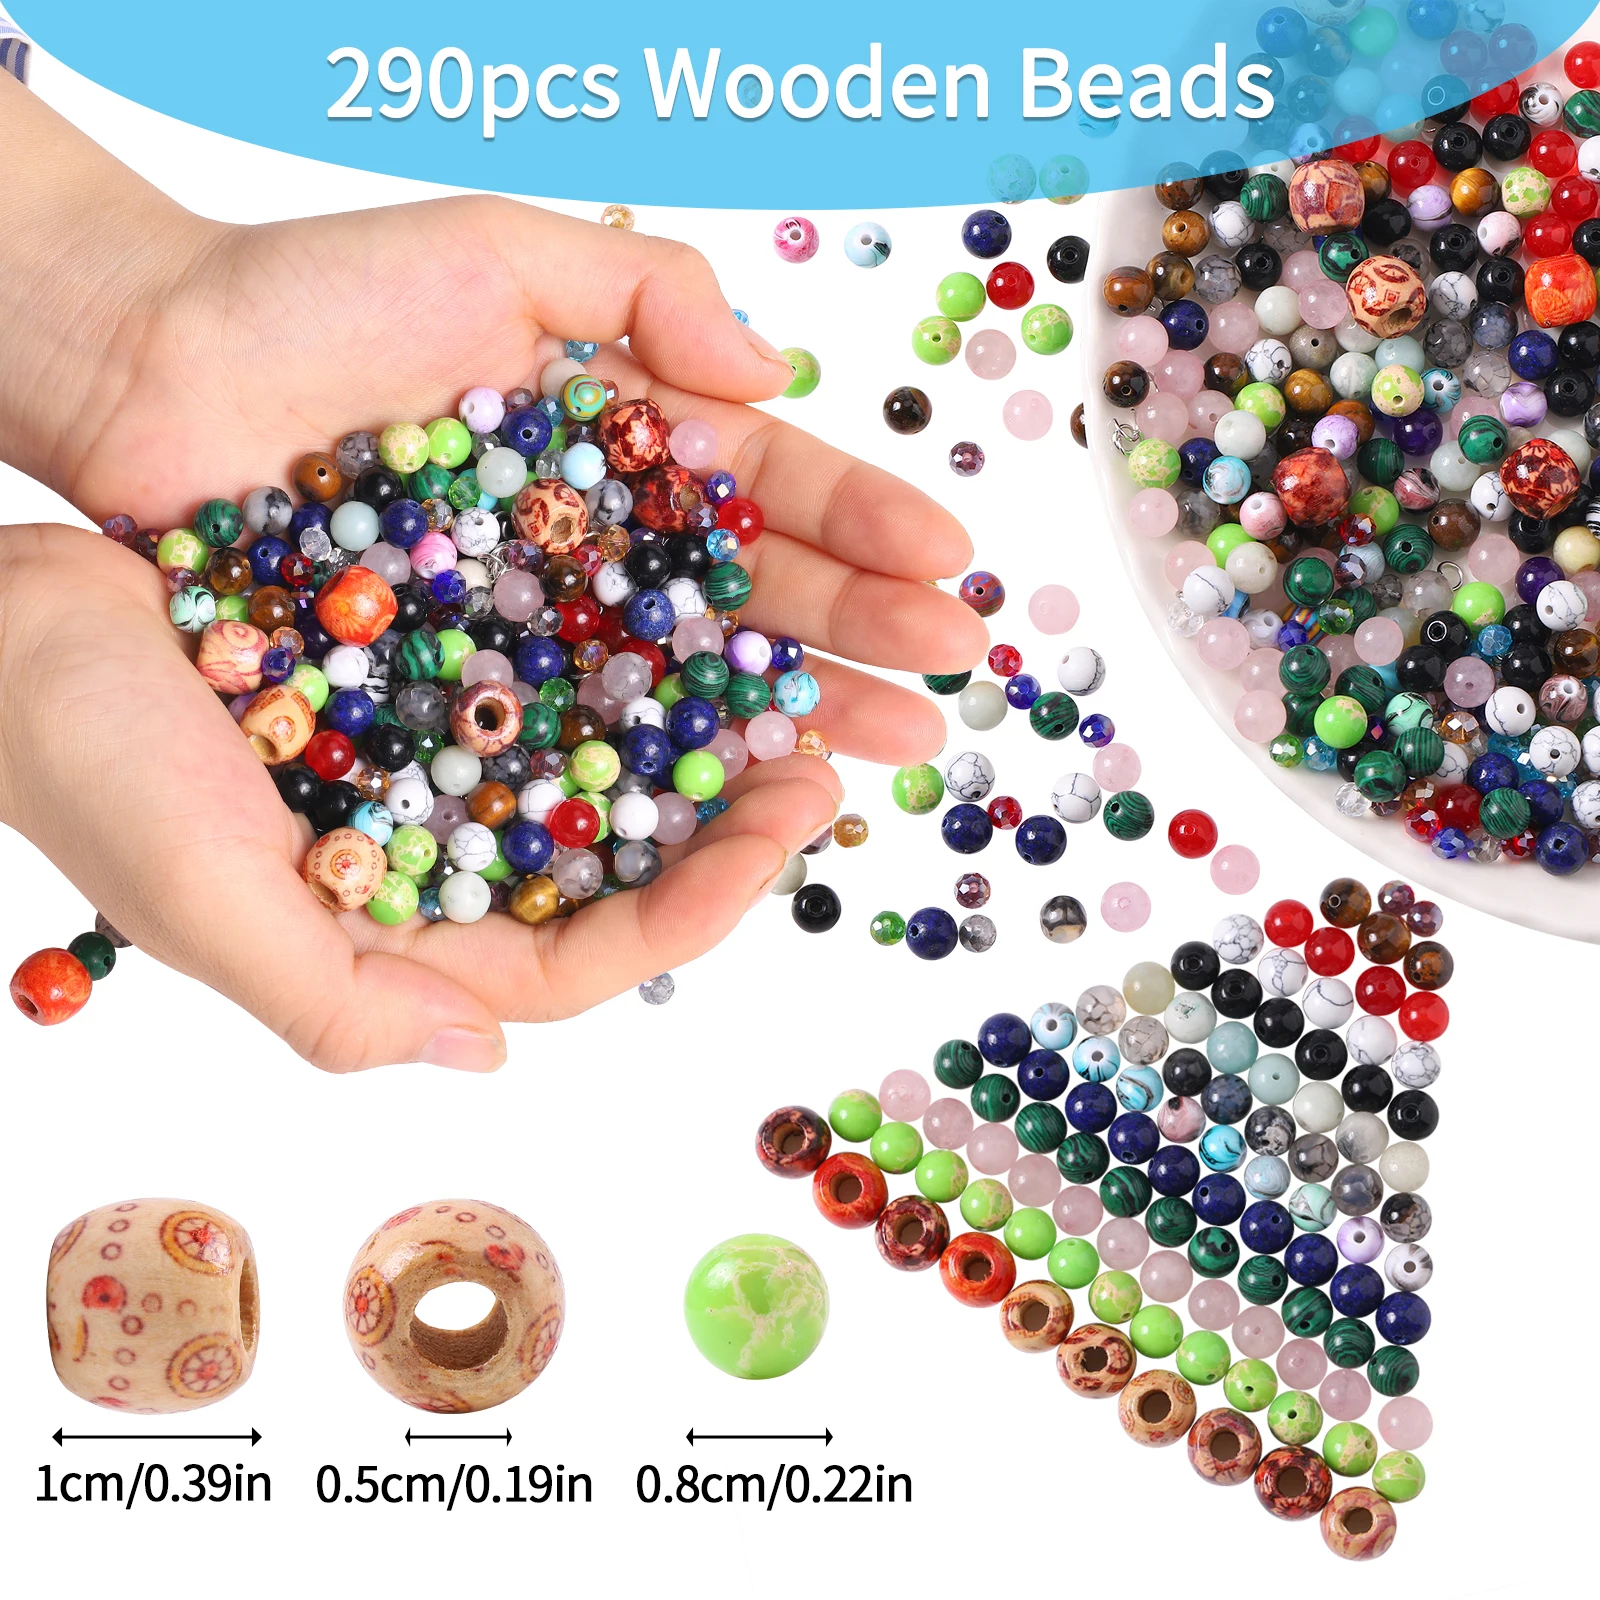 290pcs Wood Handmade DIY Mixed Alphabet Letter Beads send tools Charms Beads for Making Jewelry Handmade Bracelets Accessories 1pcs uv resin jewelry liquid silicone mold music notes shape silicone mold resin charms mold for diy decorate making jewelry